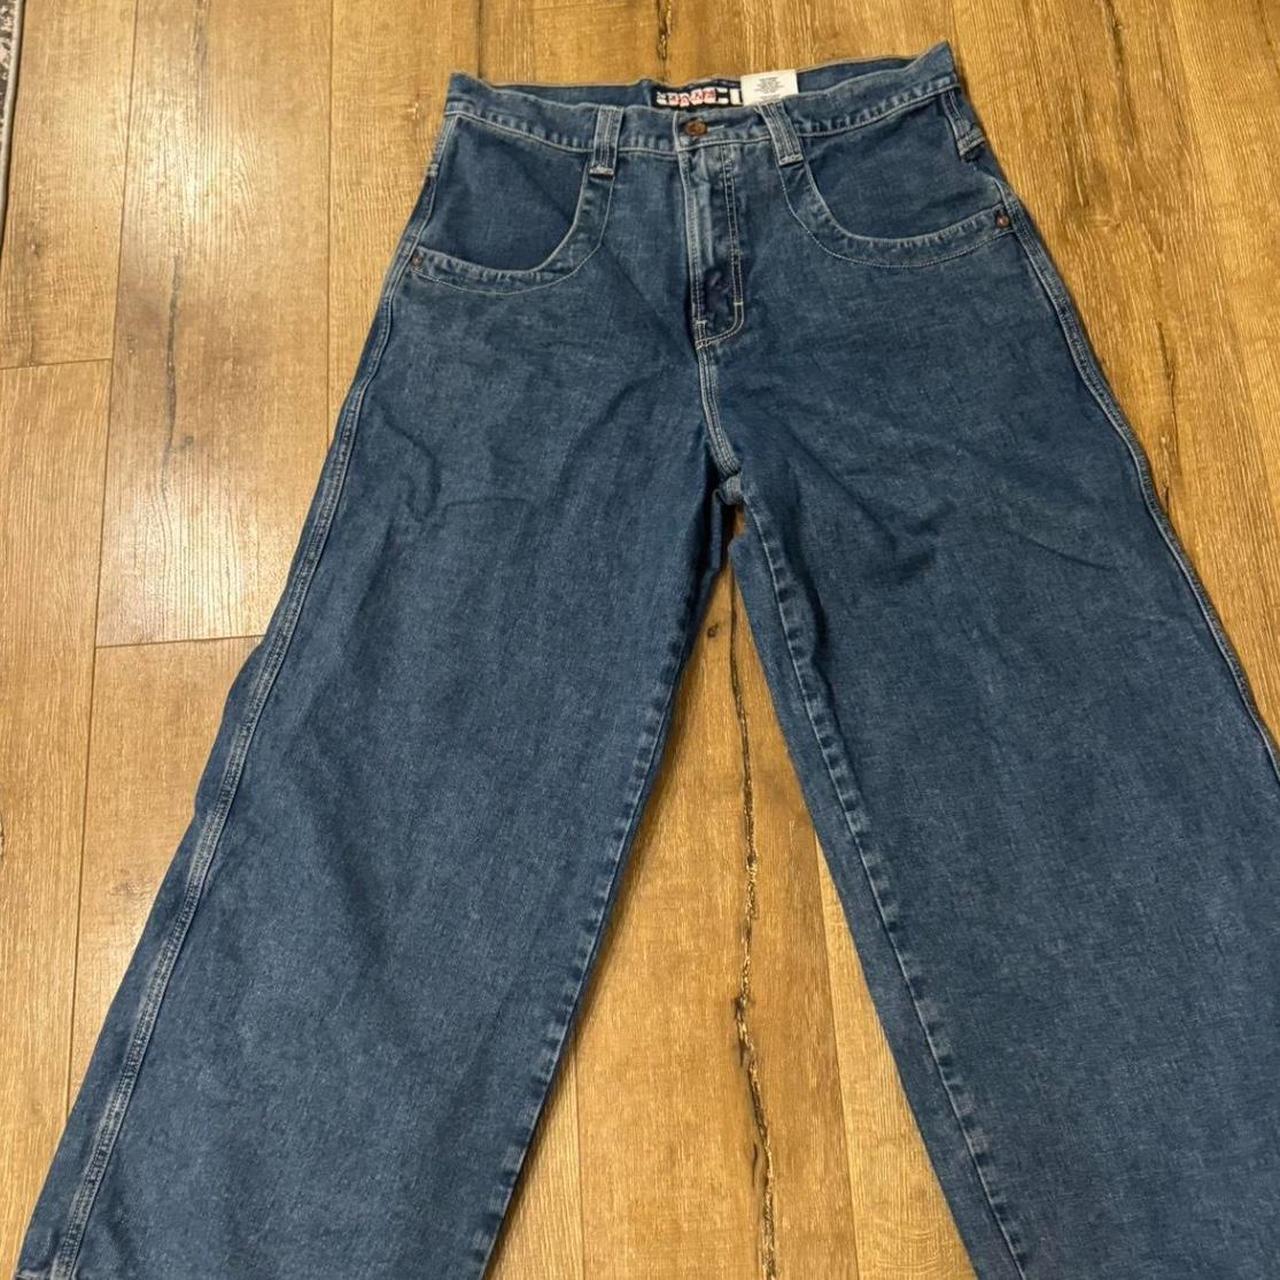 Jnco twin cannons repoped images says 36w 32L but... - Depop